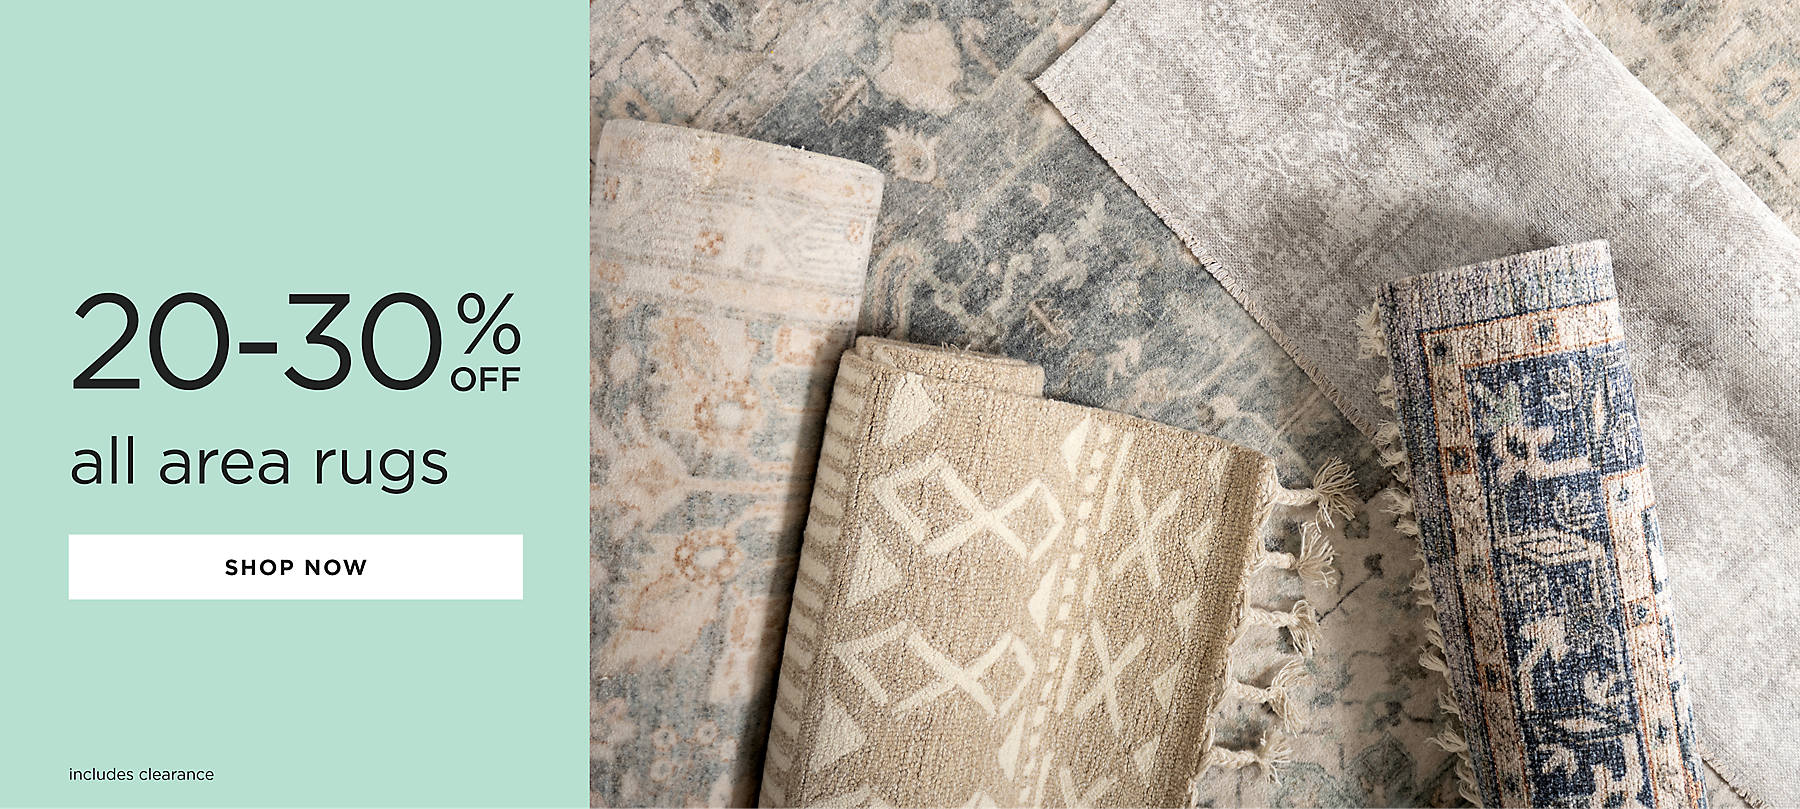 all area rugs 20-30% off shop now includes clearance